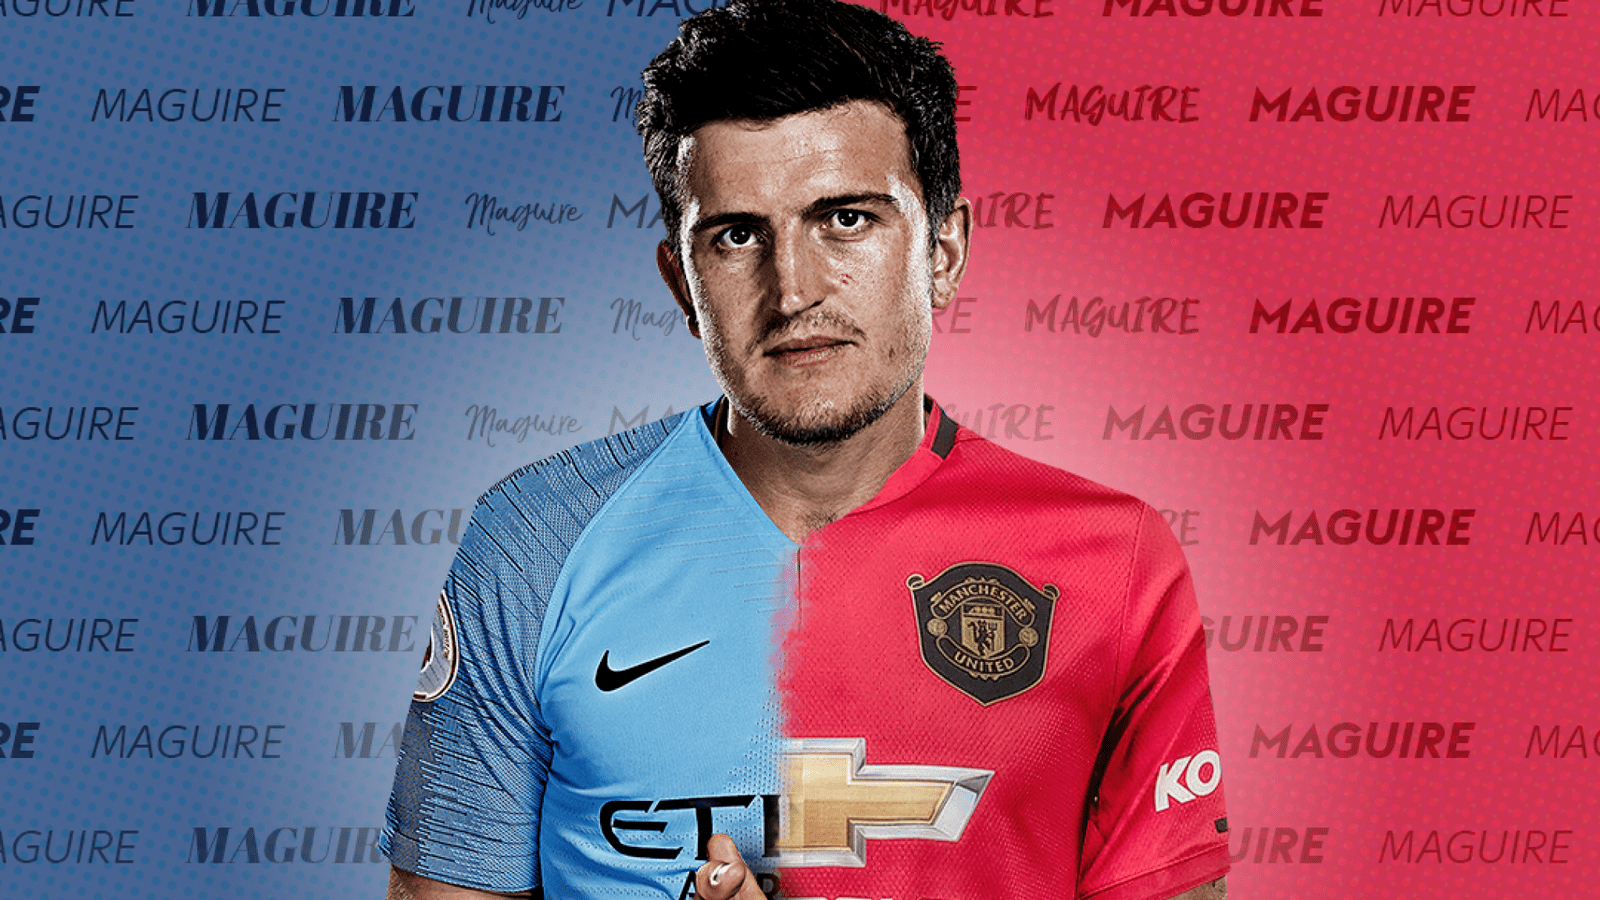 ArtStation  Harry Maguire Manchester United as an astronaut